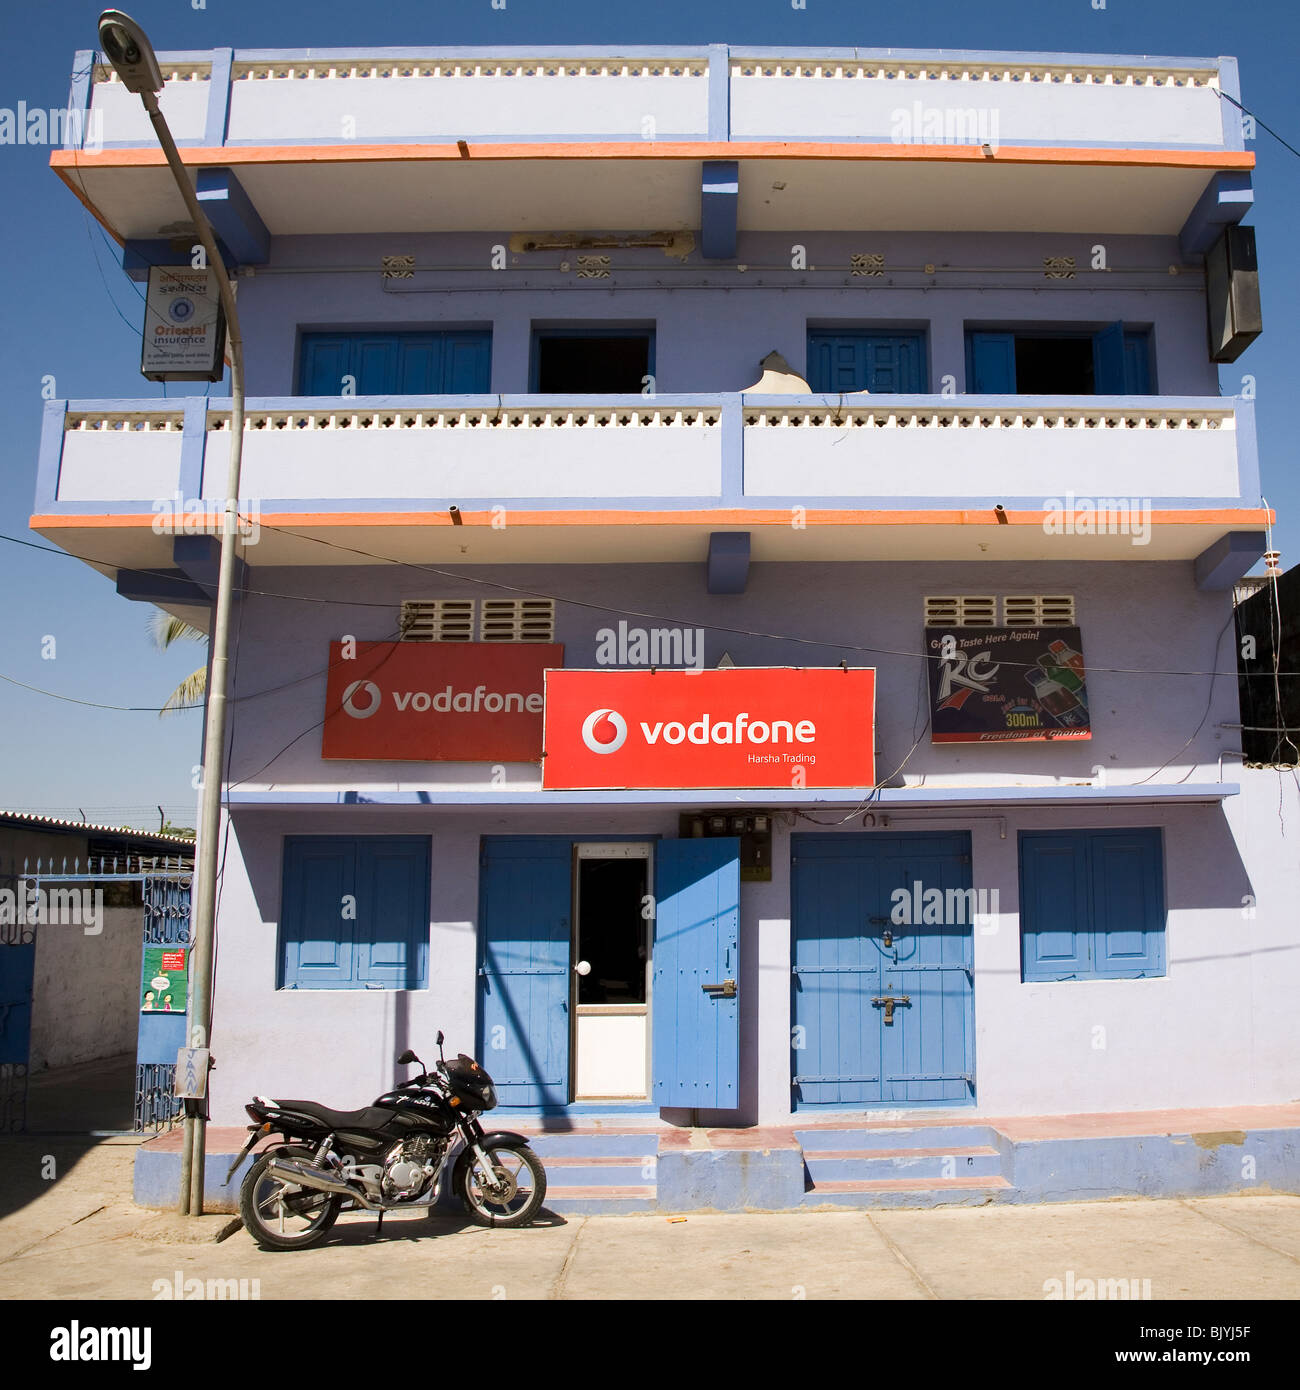 A motorbike stands outside of a Vodafone shop Diu, Inda. Stock Photo